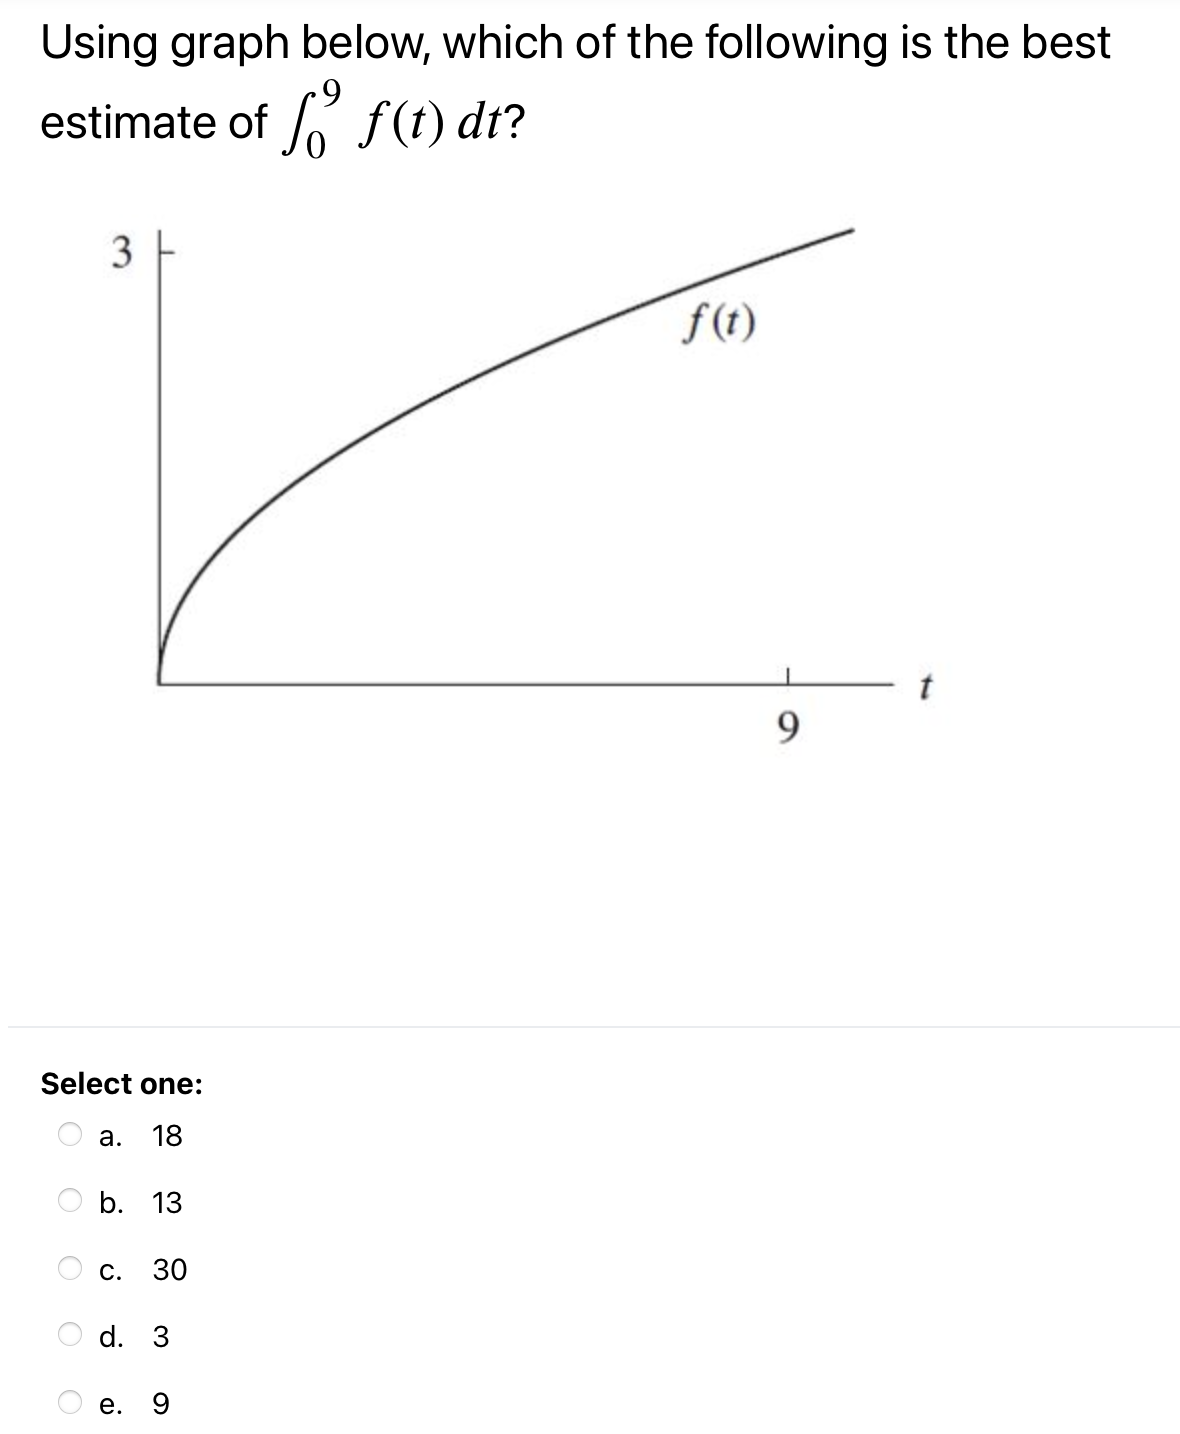 Using graph below, which of the following is the best
estimate of 6
f(t) dt?
f(t)
9.
Select one:
а.
18
b. 13
С. 30
d. 3
е. 9
3.
